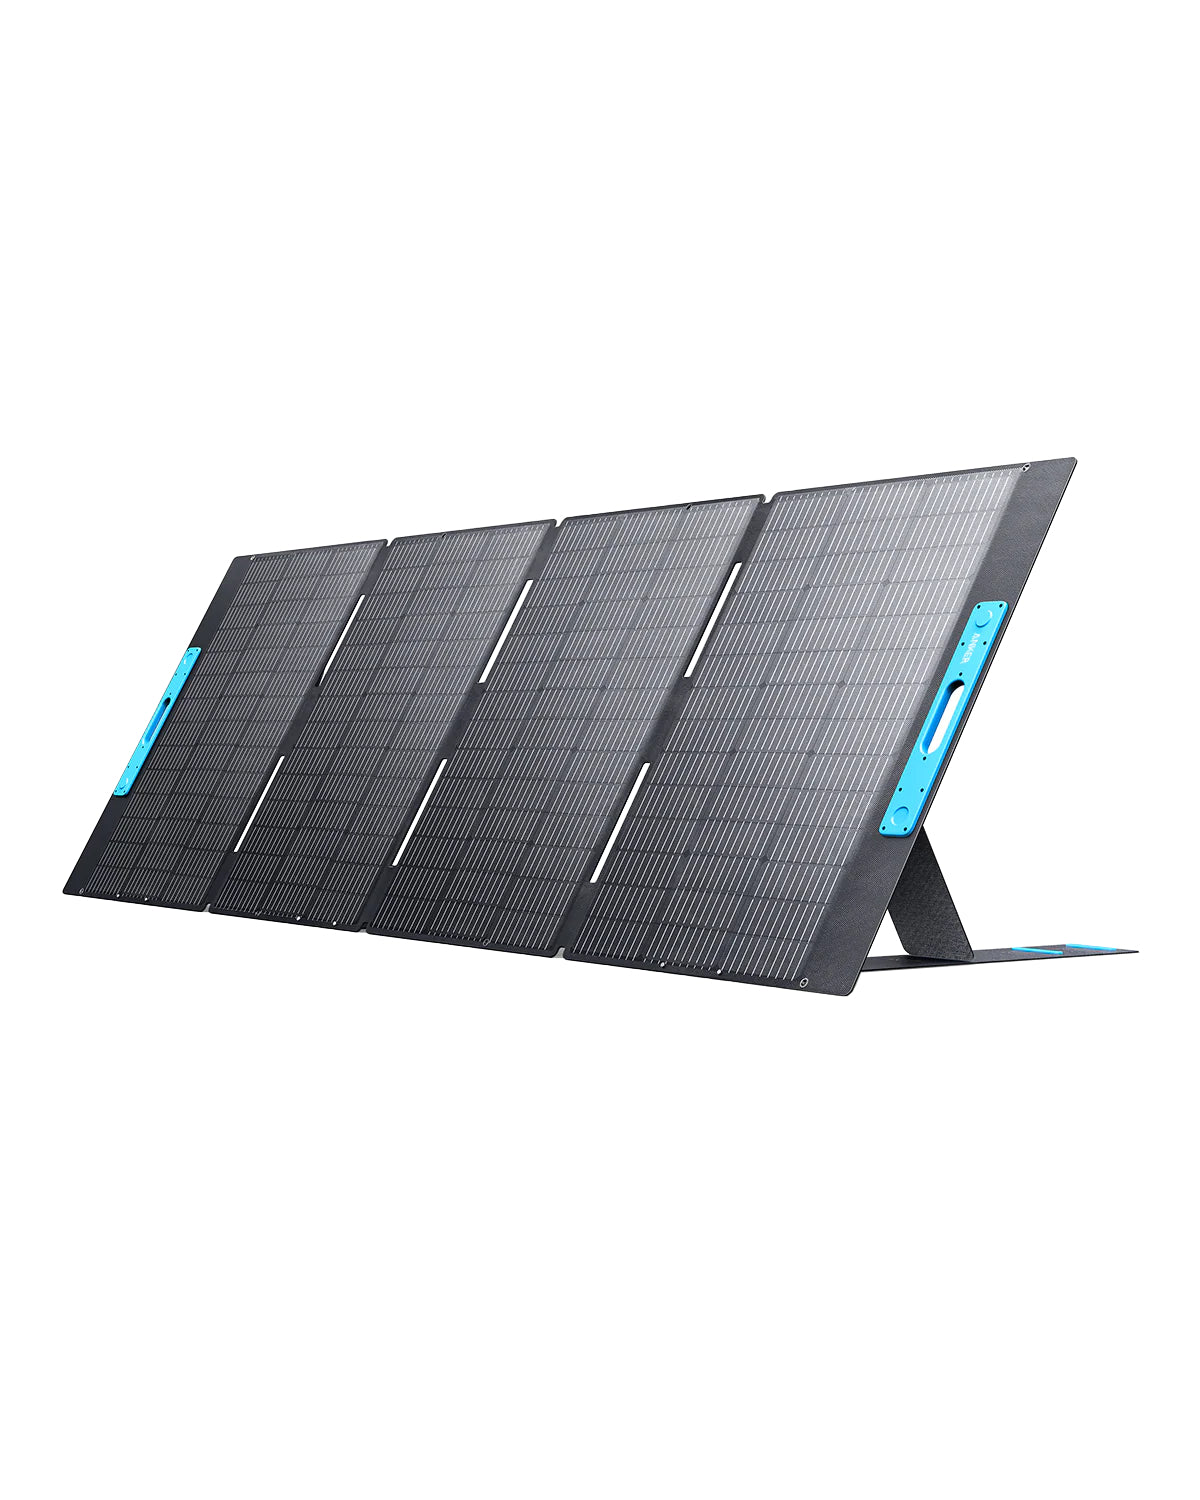 Solar & Battery Powered - Anker Solix PS400 Solar Panel (400W)